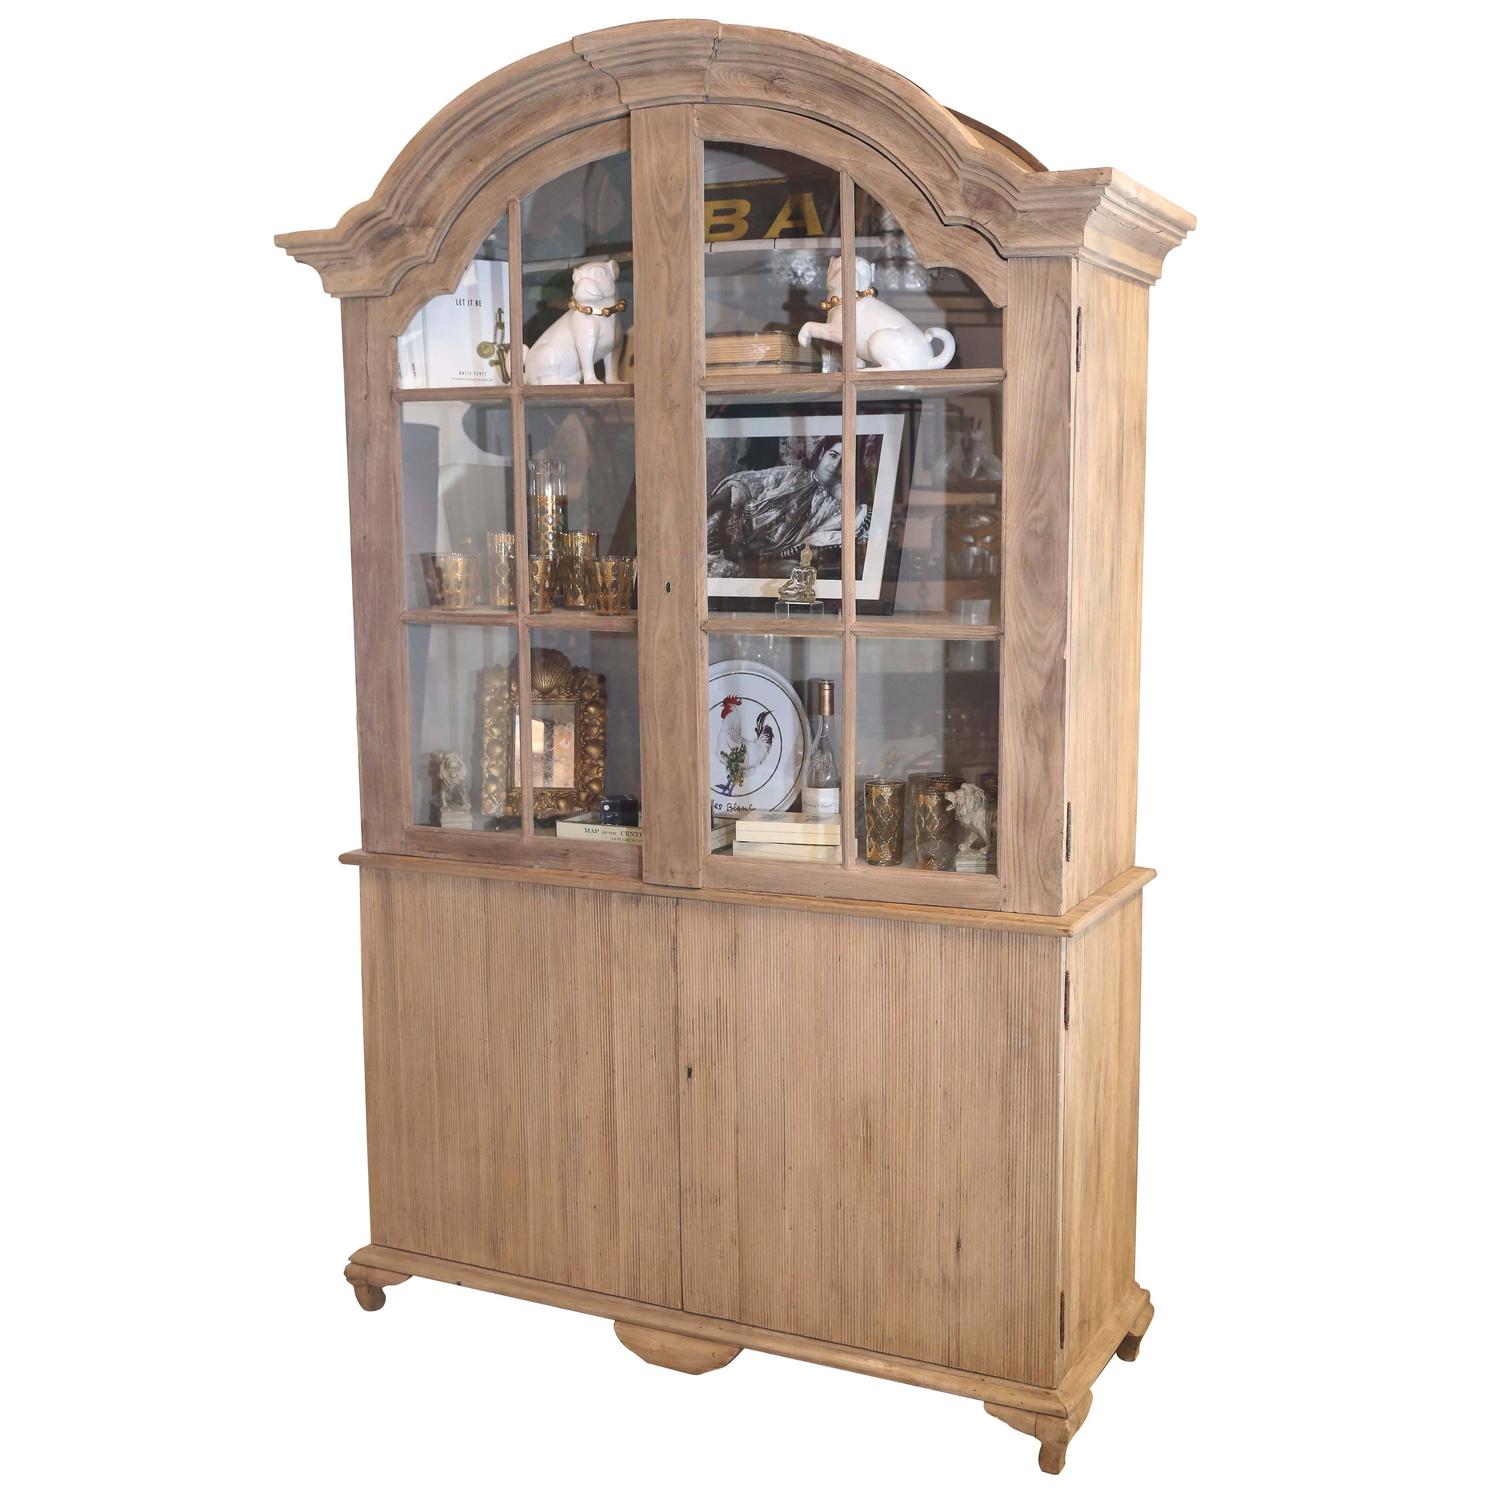 Large Distressed Hugh Cabinet w/ Glass Pane Doors For Sale at 1stdibs